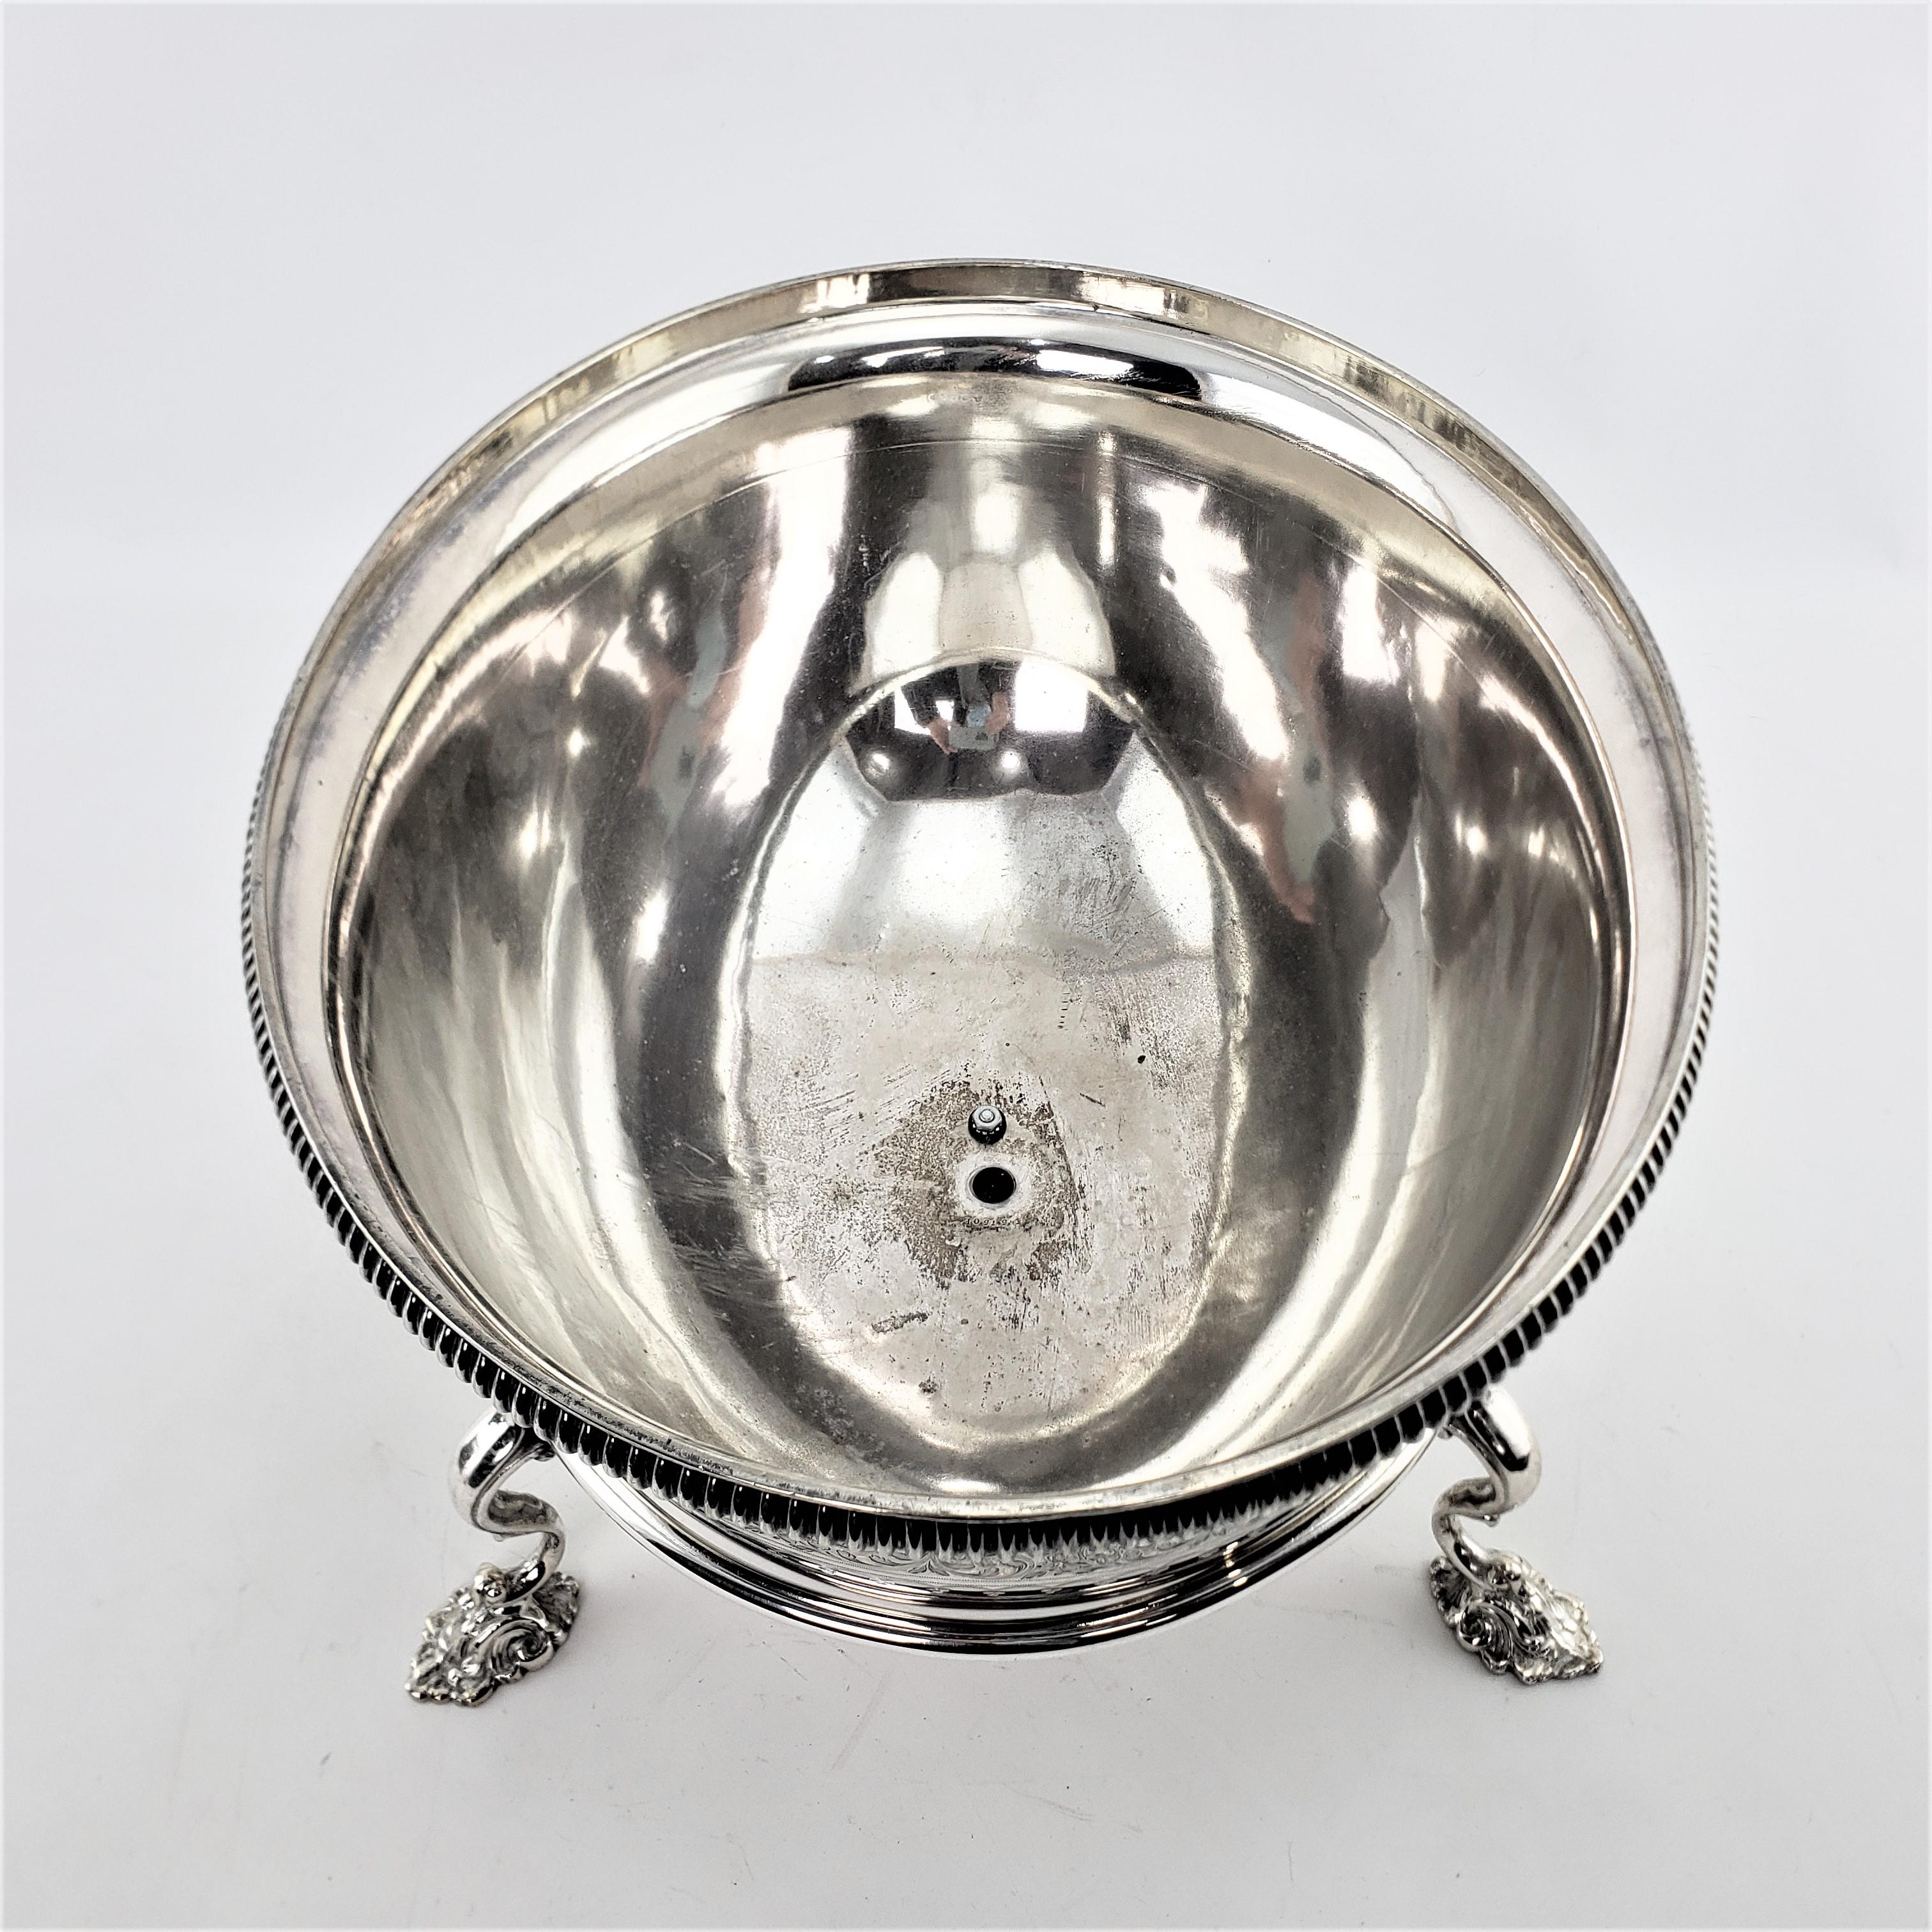 Machine-Made Antique Silver Plated Converted Meat Dome Ice Trough, Wine Cooler or Centerpiece For Sale